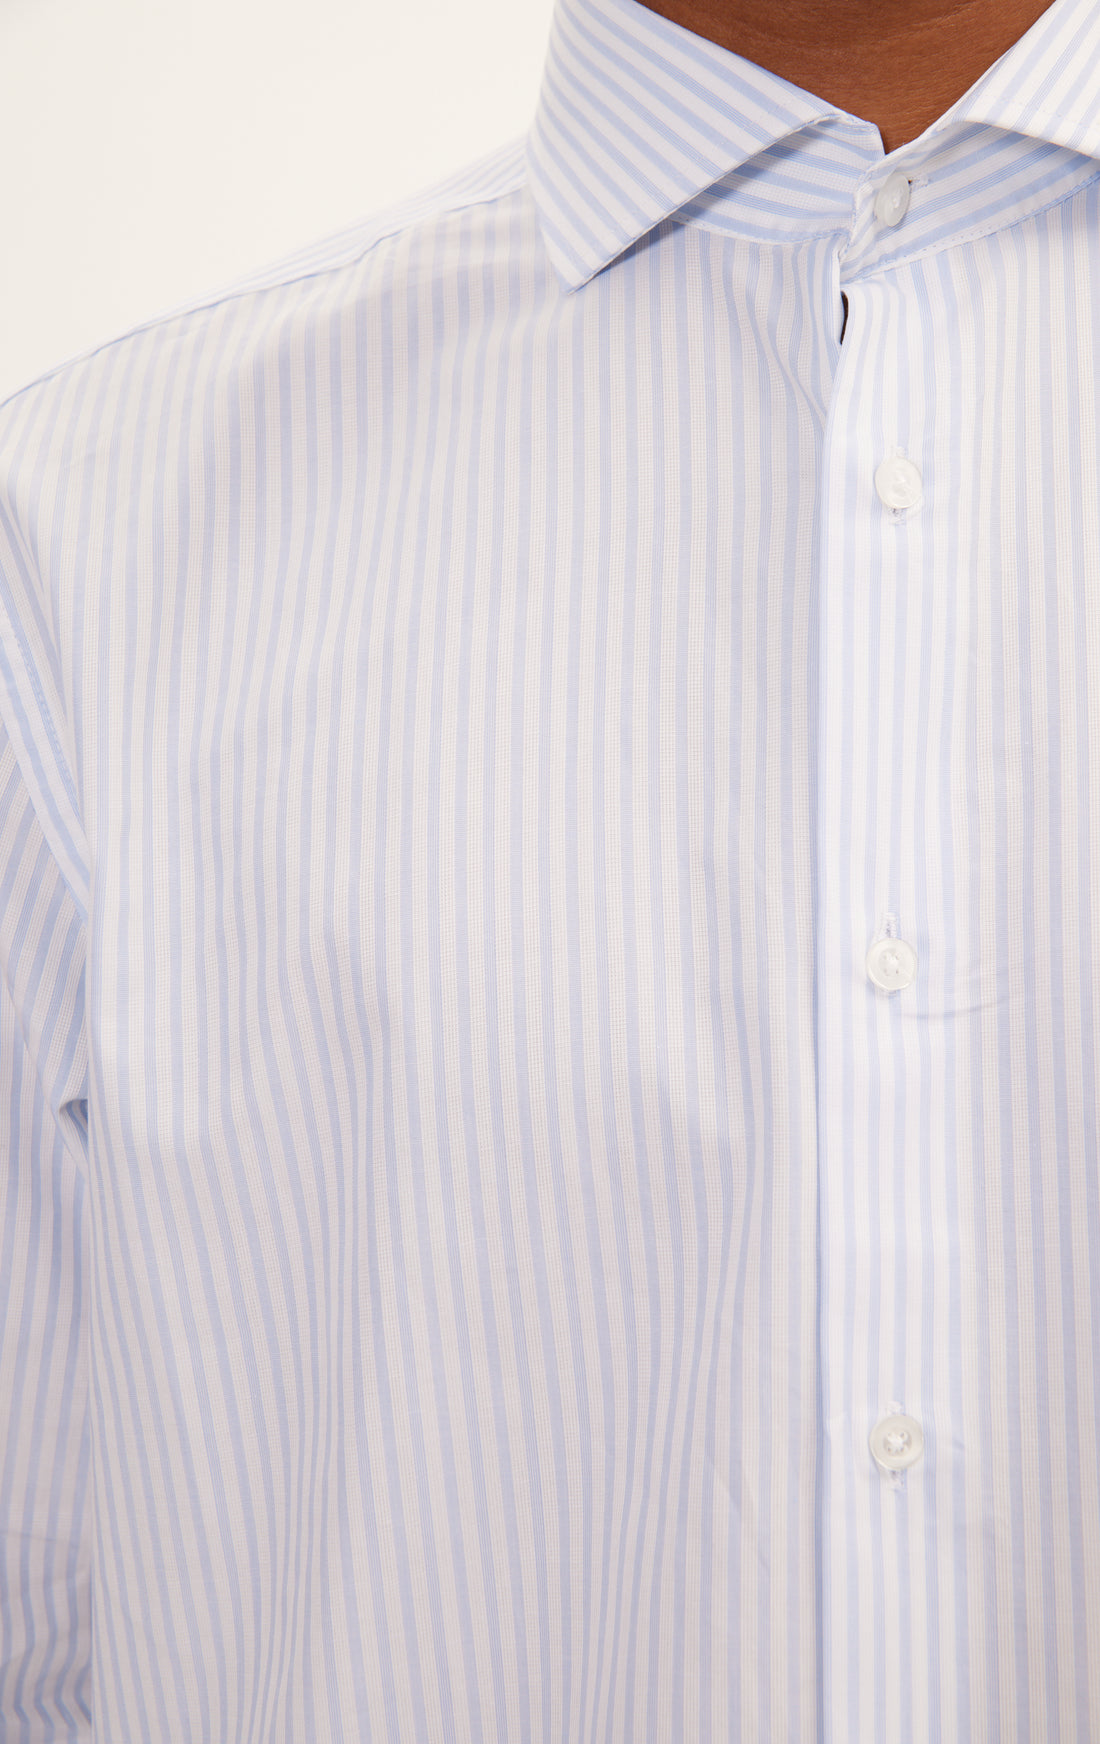 N° AN4903 PURE COTTON FRENCH PLACKET SPREAD COLLAR DRESS SHIRT - WHITE BLUE BENGAL STRIPES